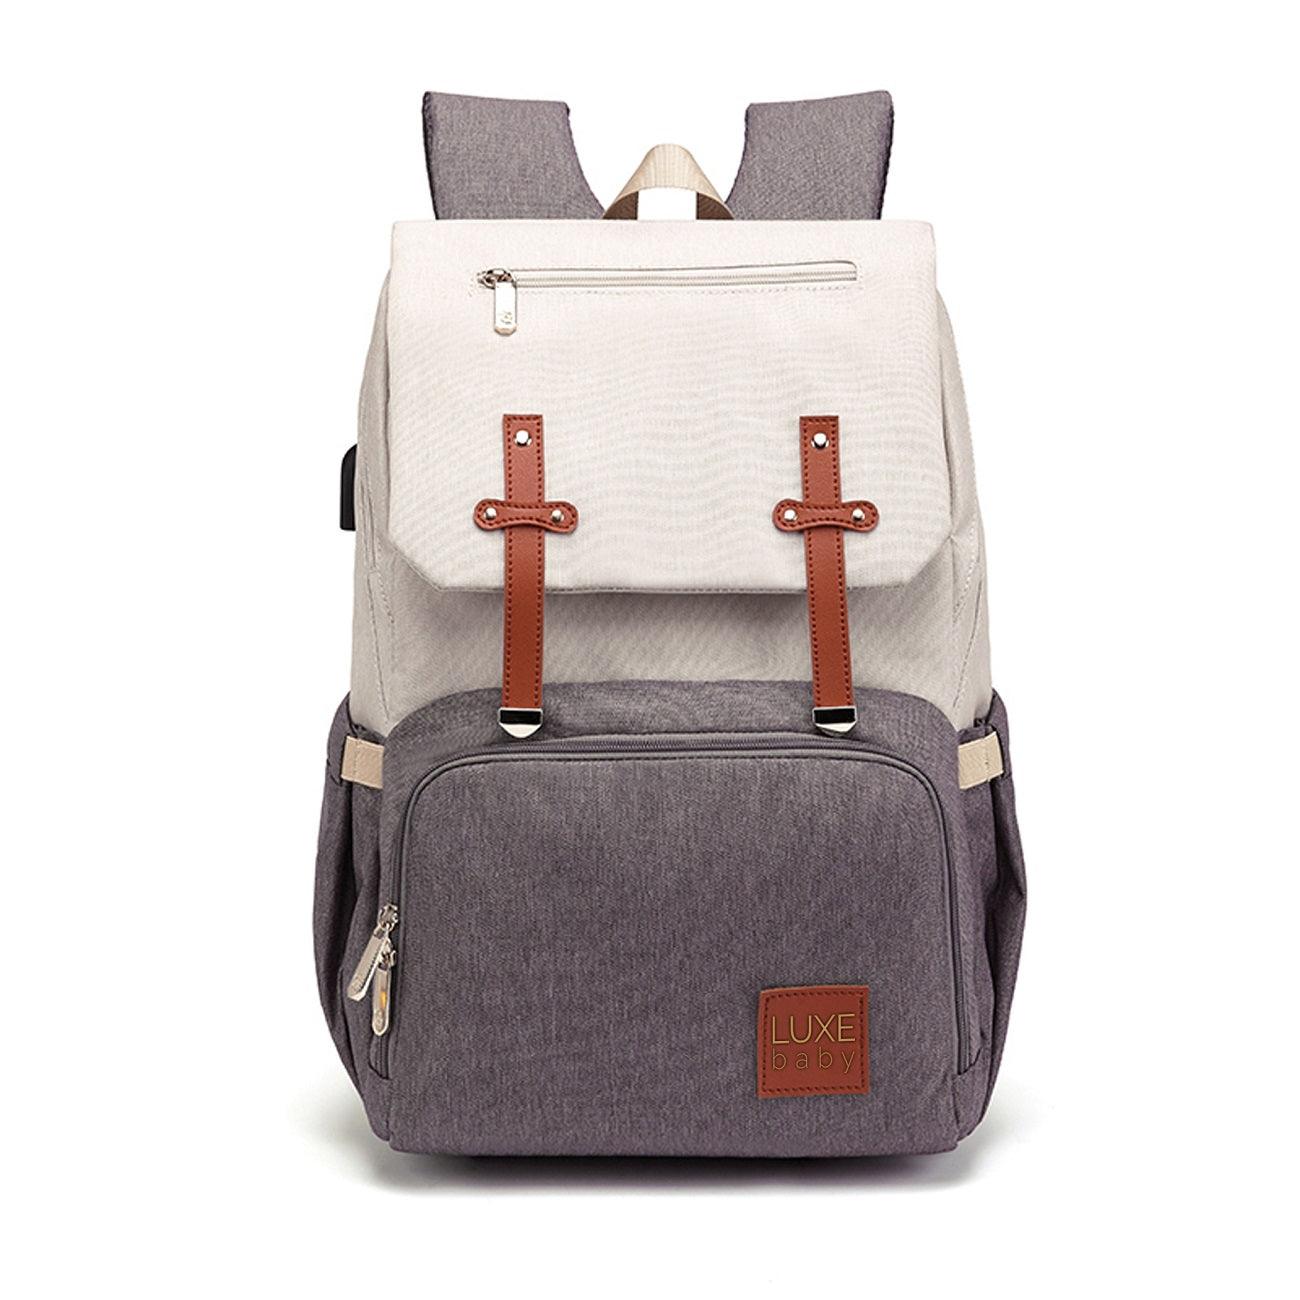 go on an adventure with the Luxe nappy backpack - perfect keeping babies clothing organised